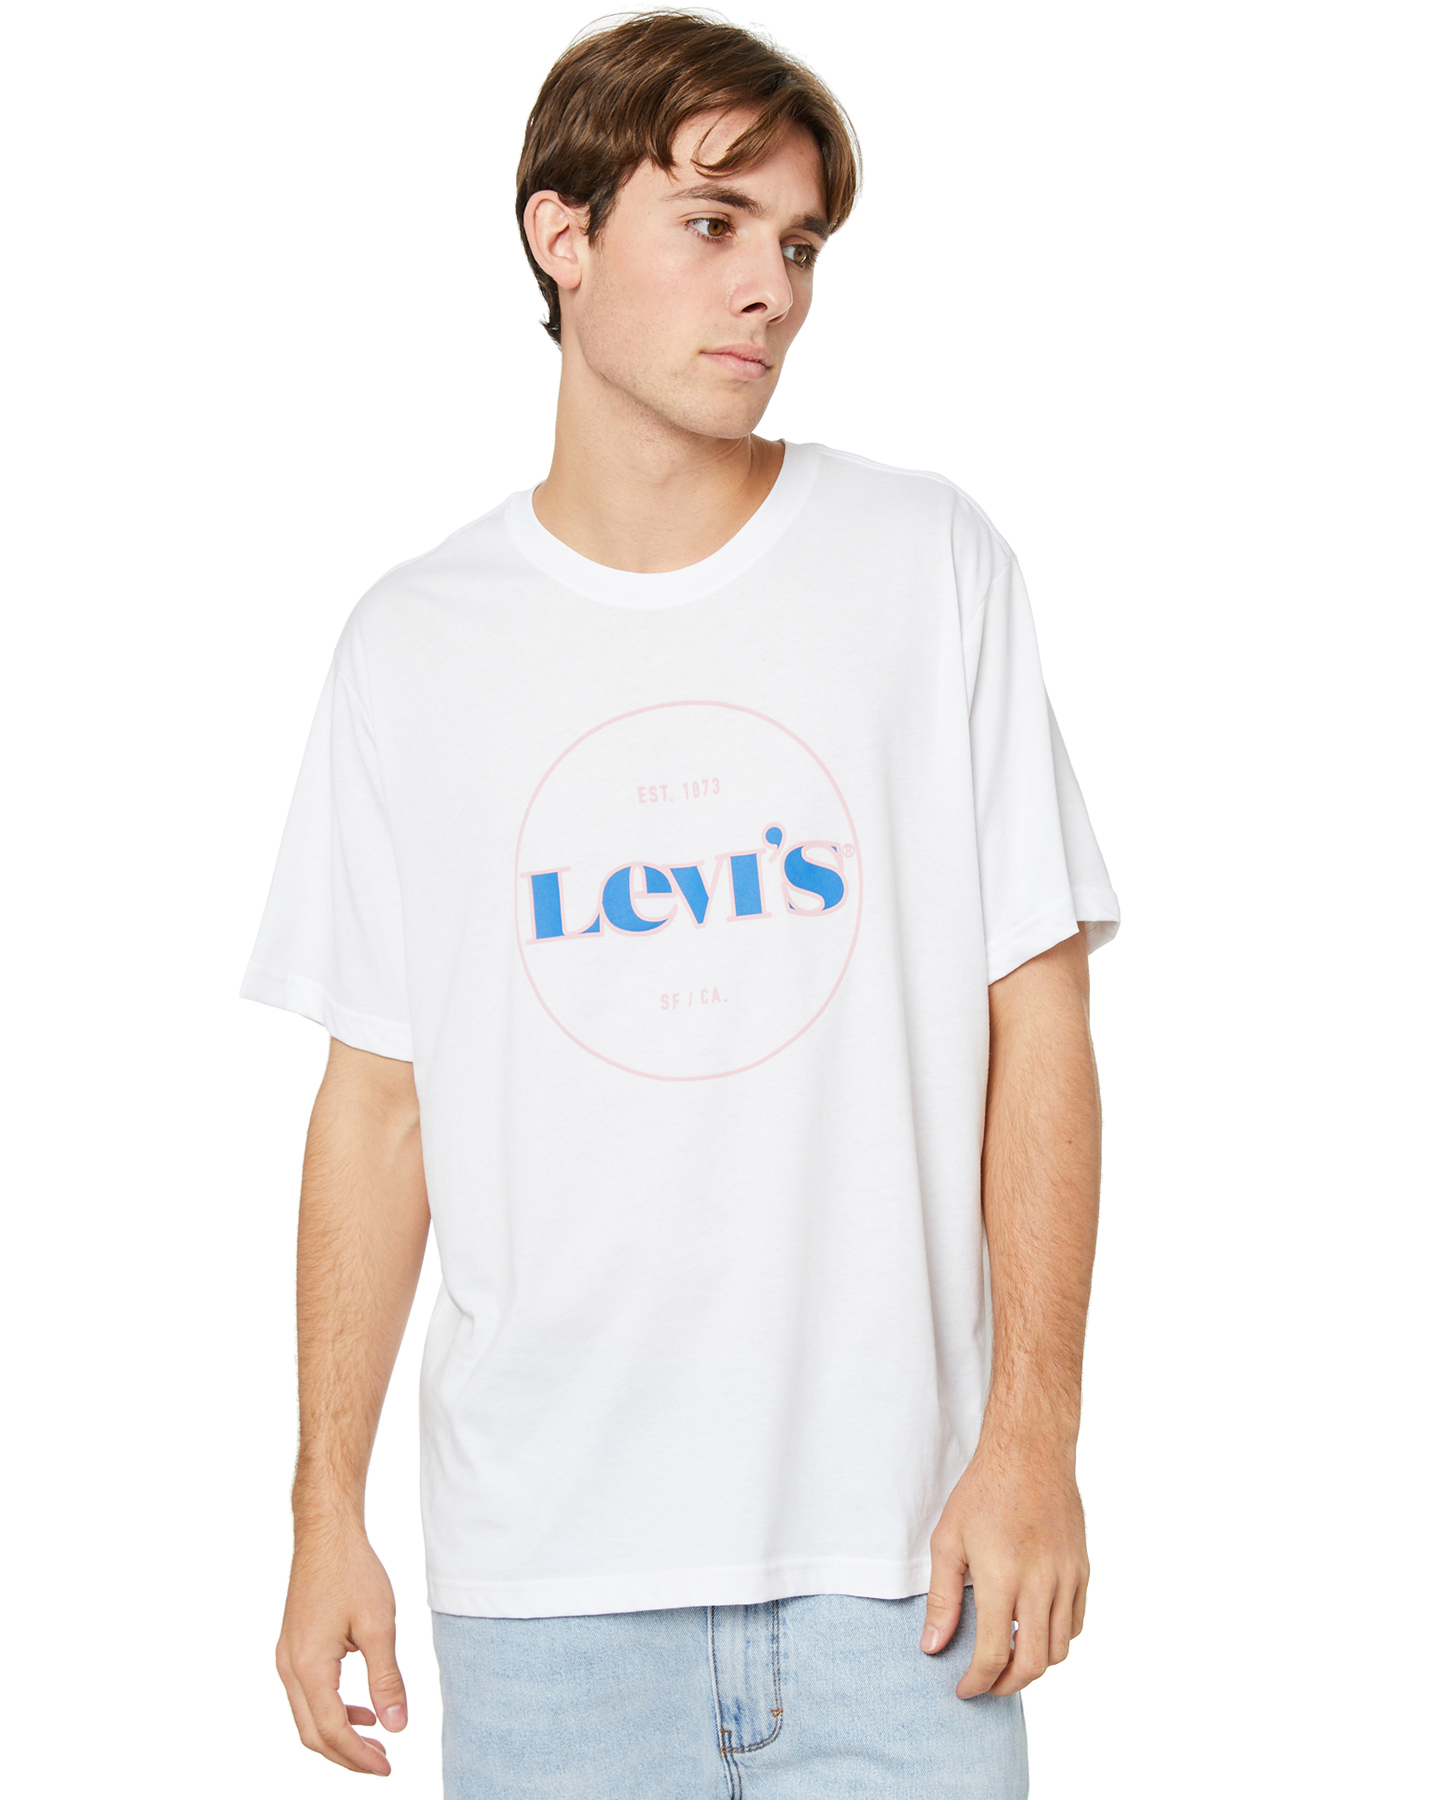 Levi's Relaxed Ssnl Logo Mens Tee - White Circle | SurfStitch